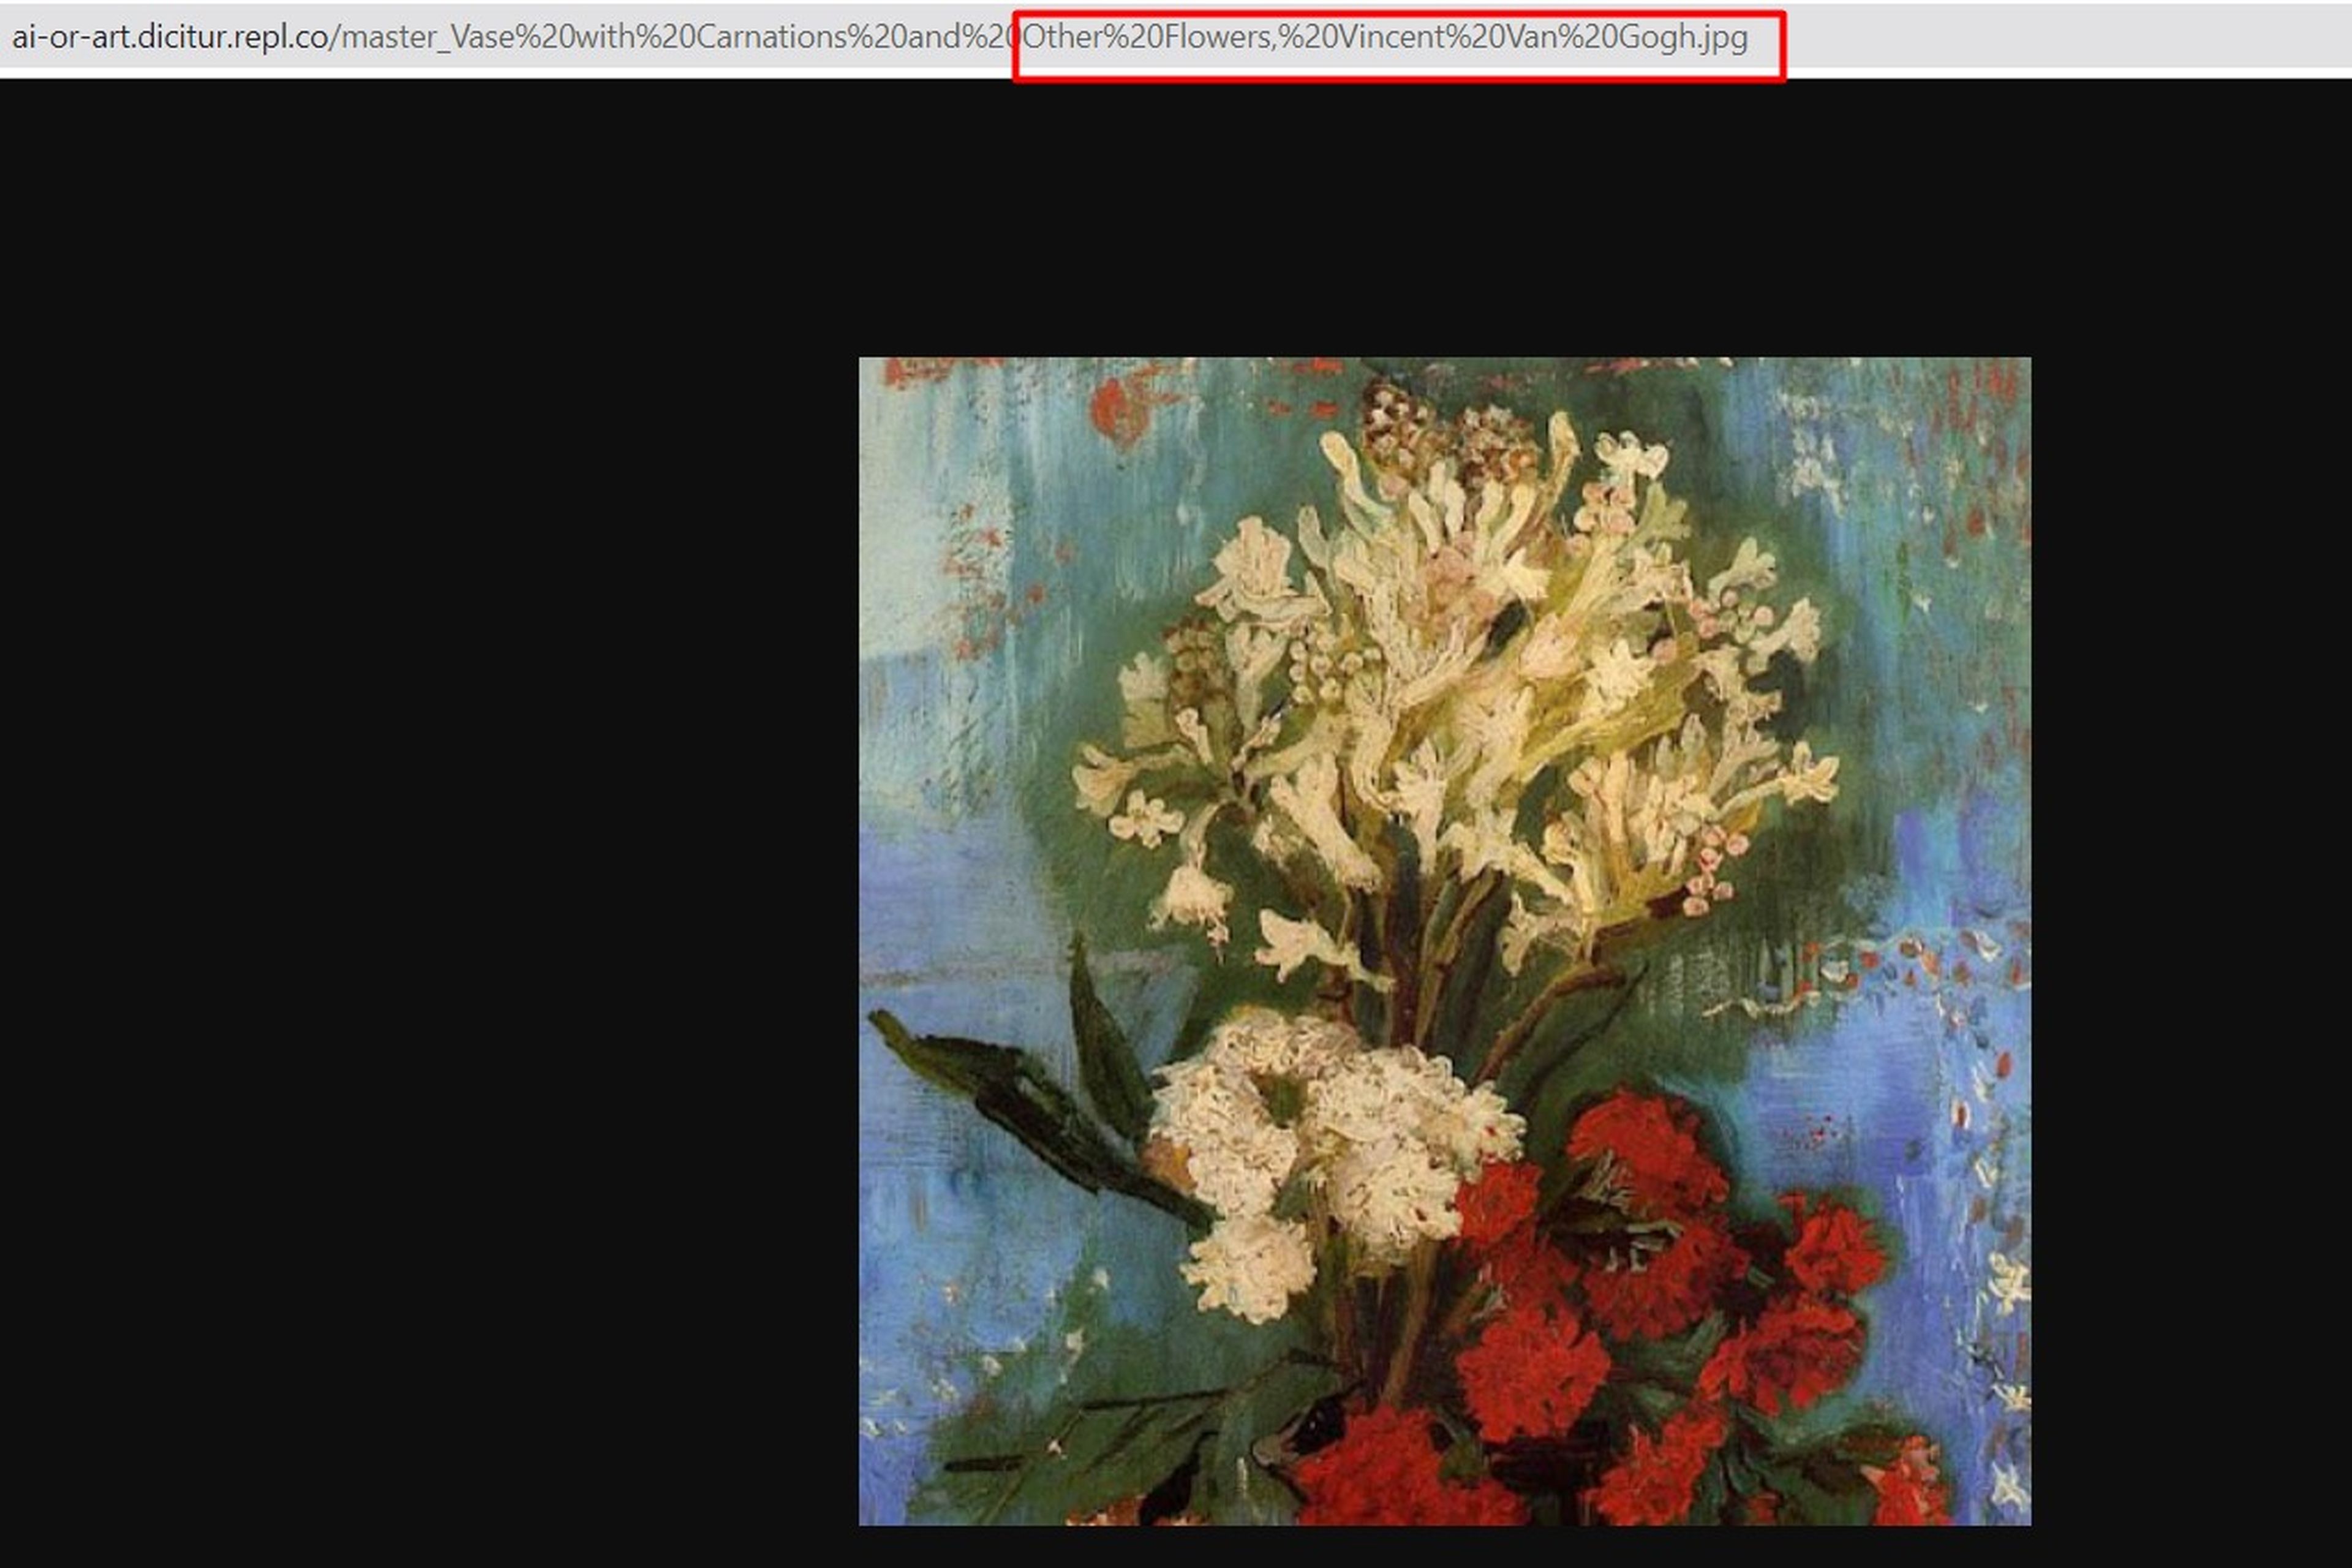 Real or AI artwork: can you tell the difference?  test yourself with this website